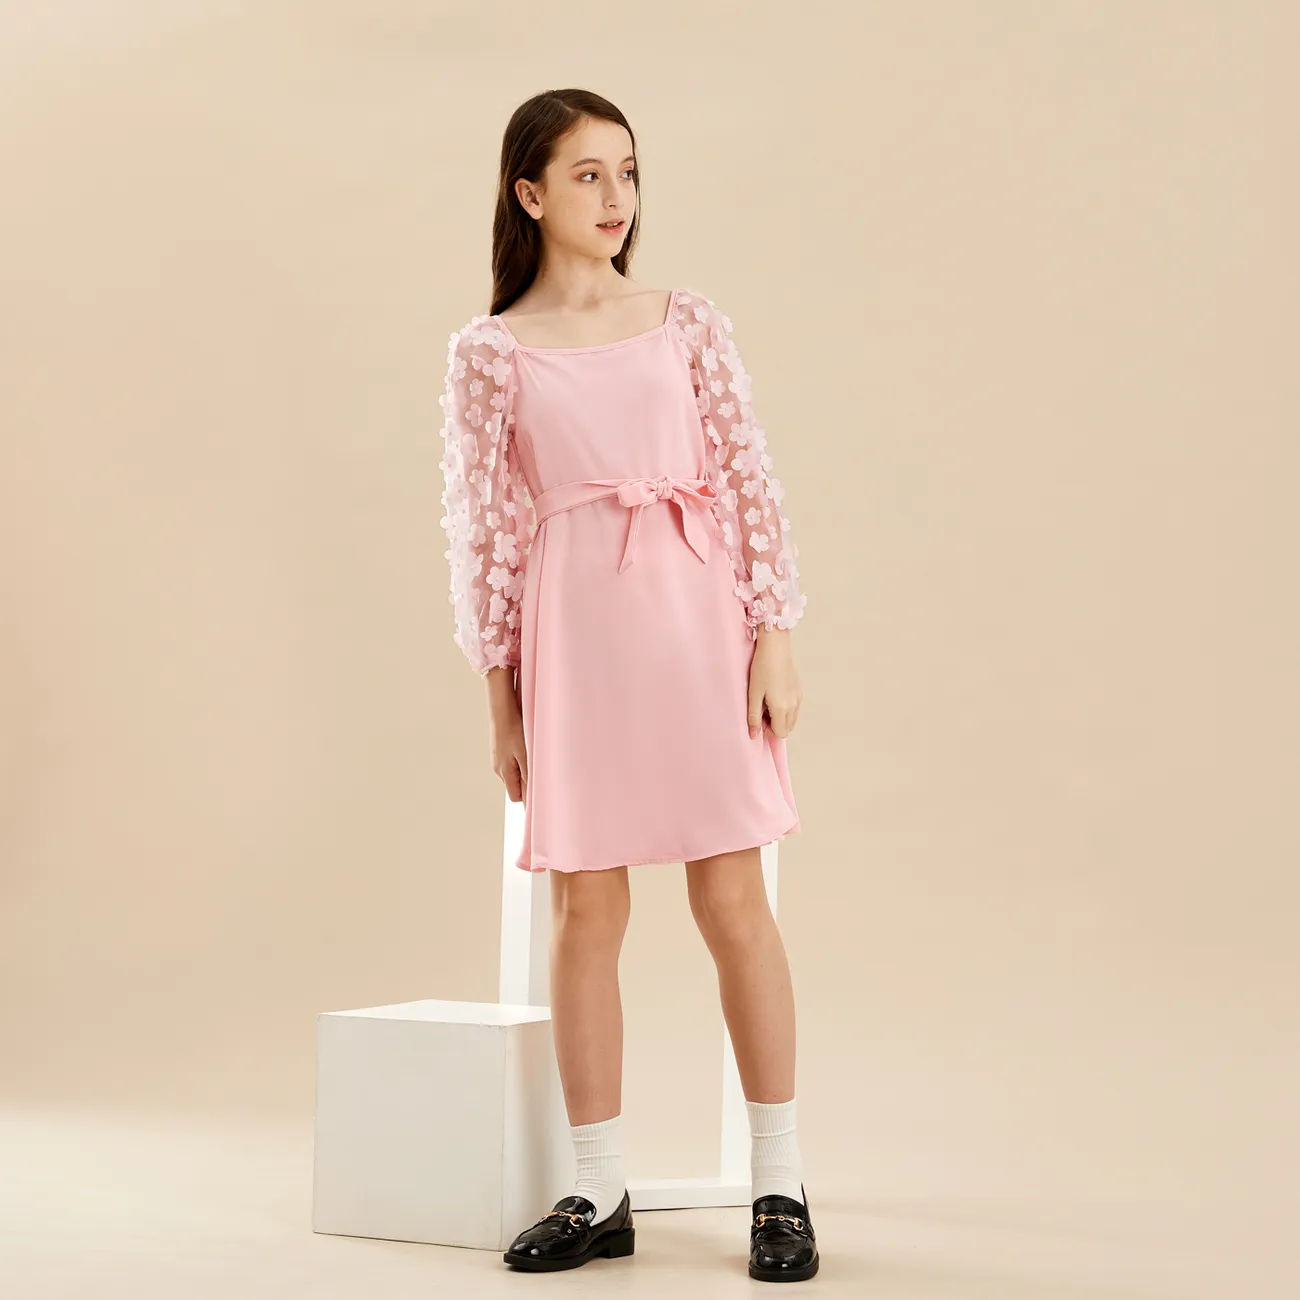 Kid Girl Flower Embroidery Square Neck Mesh Long-sleeve Dress with Bow Belt Pink big image 1